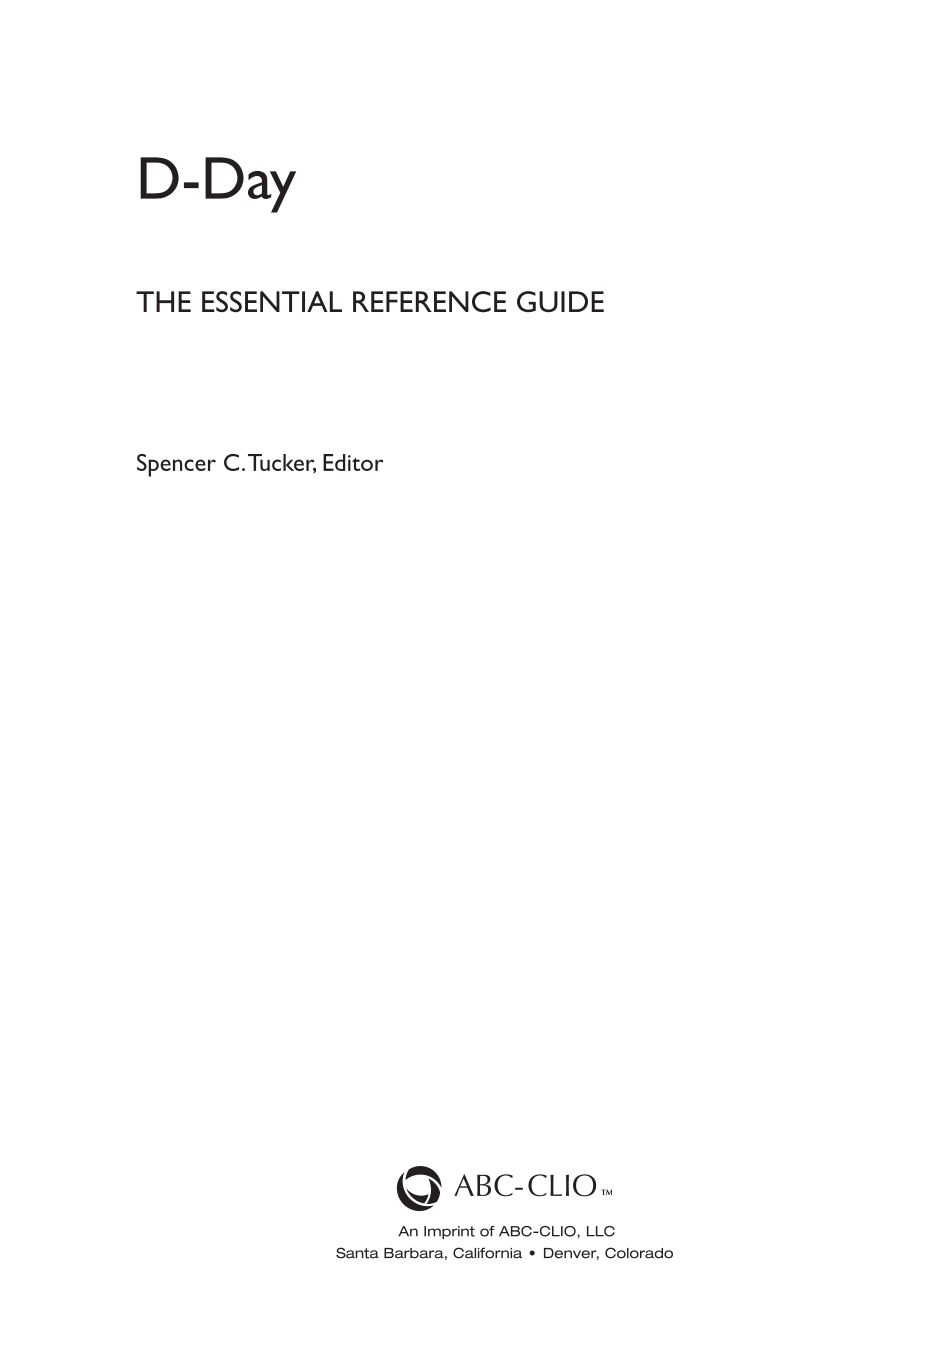 D-Day: The Essential Reference Guide page iii